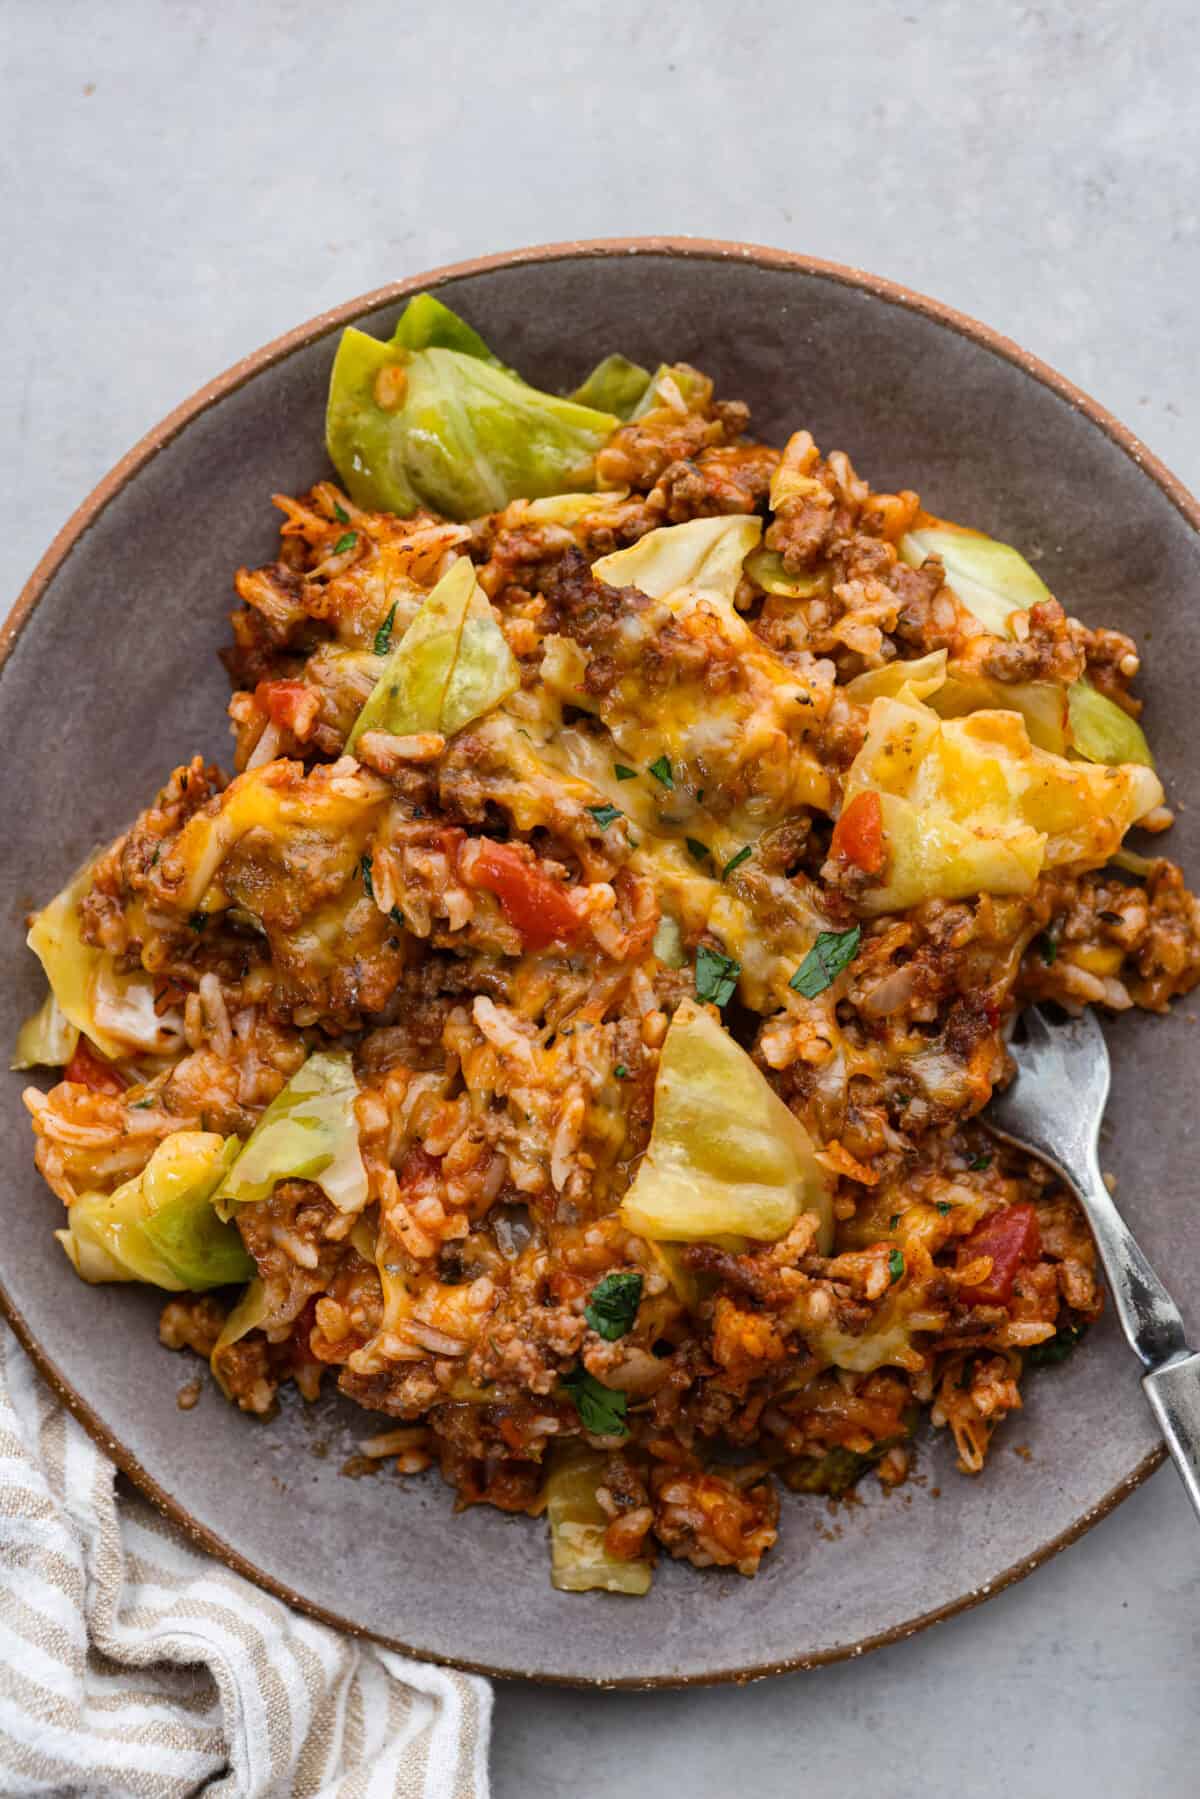 Top view of cabbage roll casserole on a brown plate with a fork.